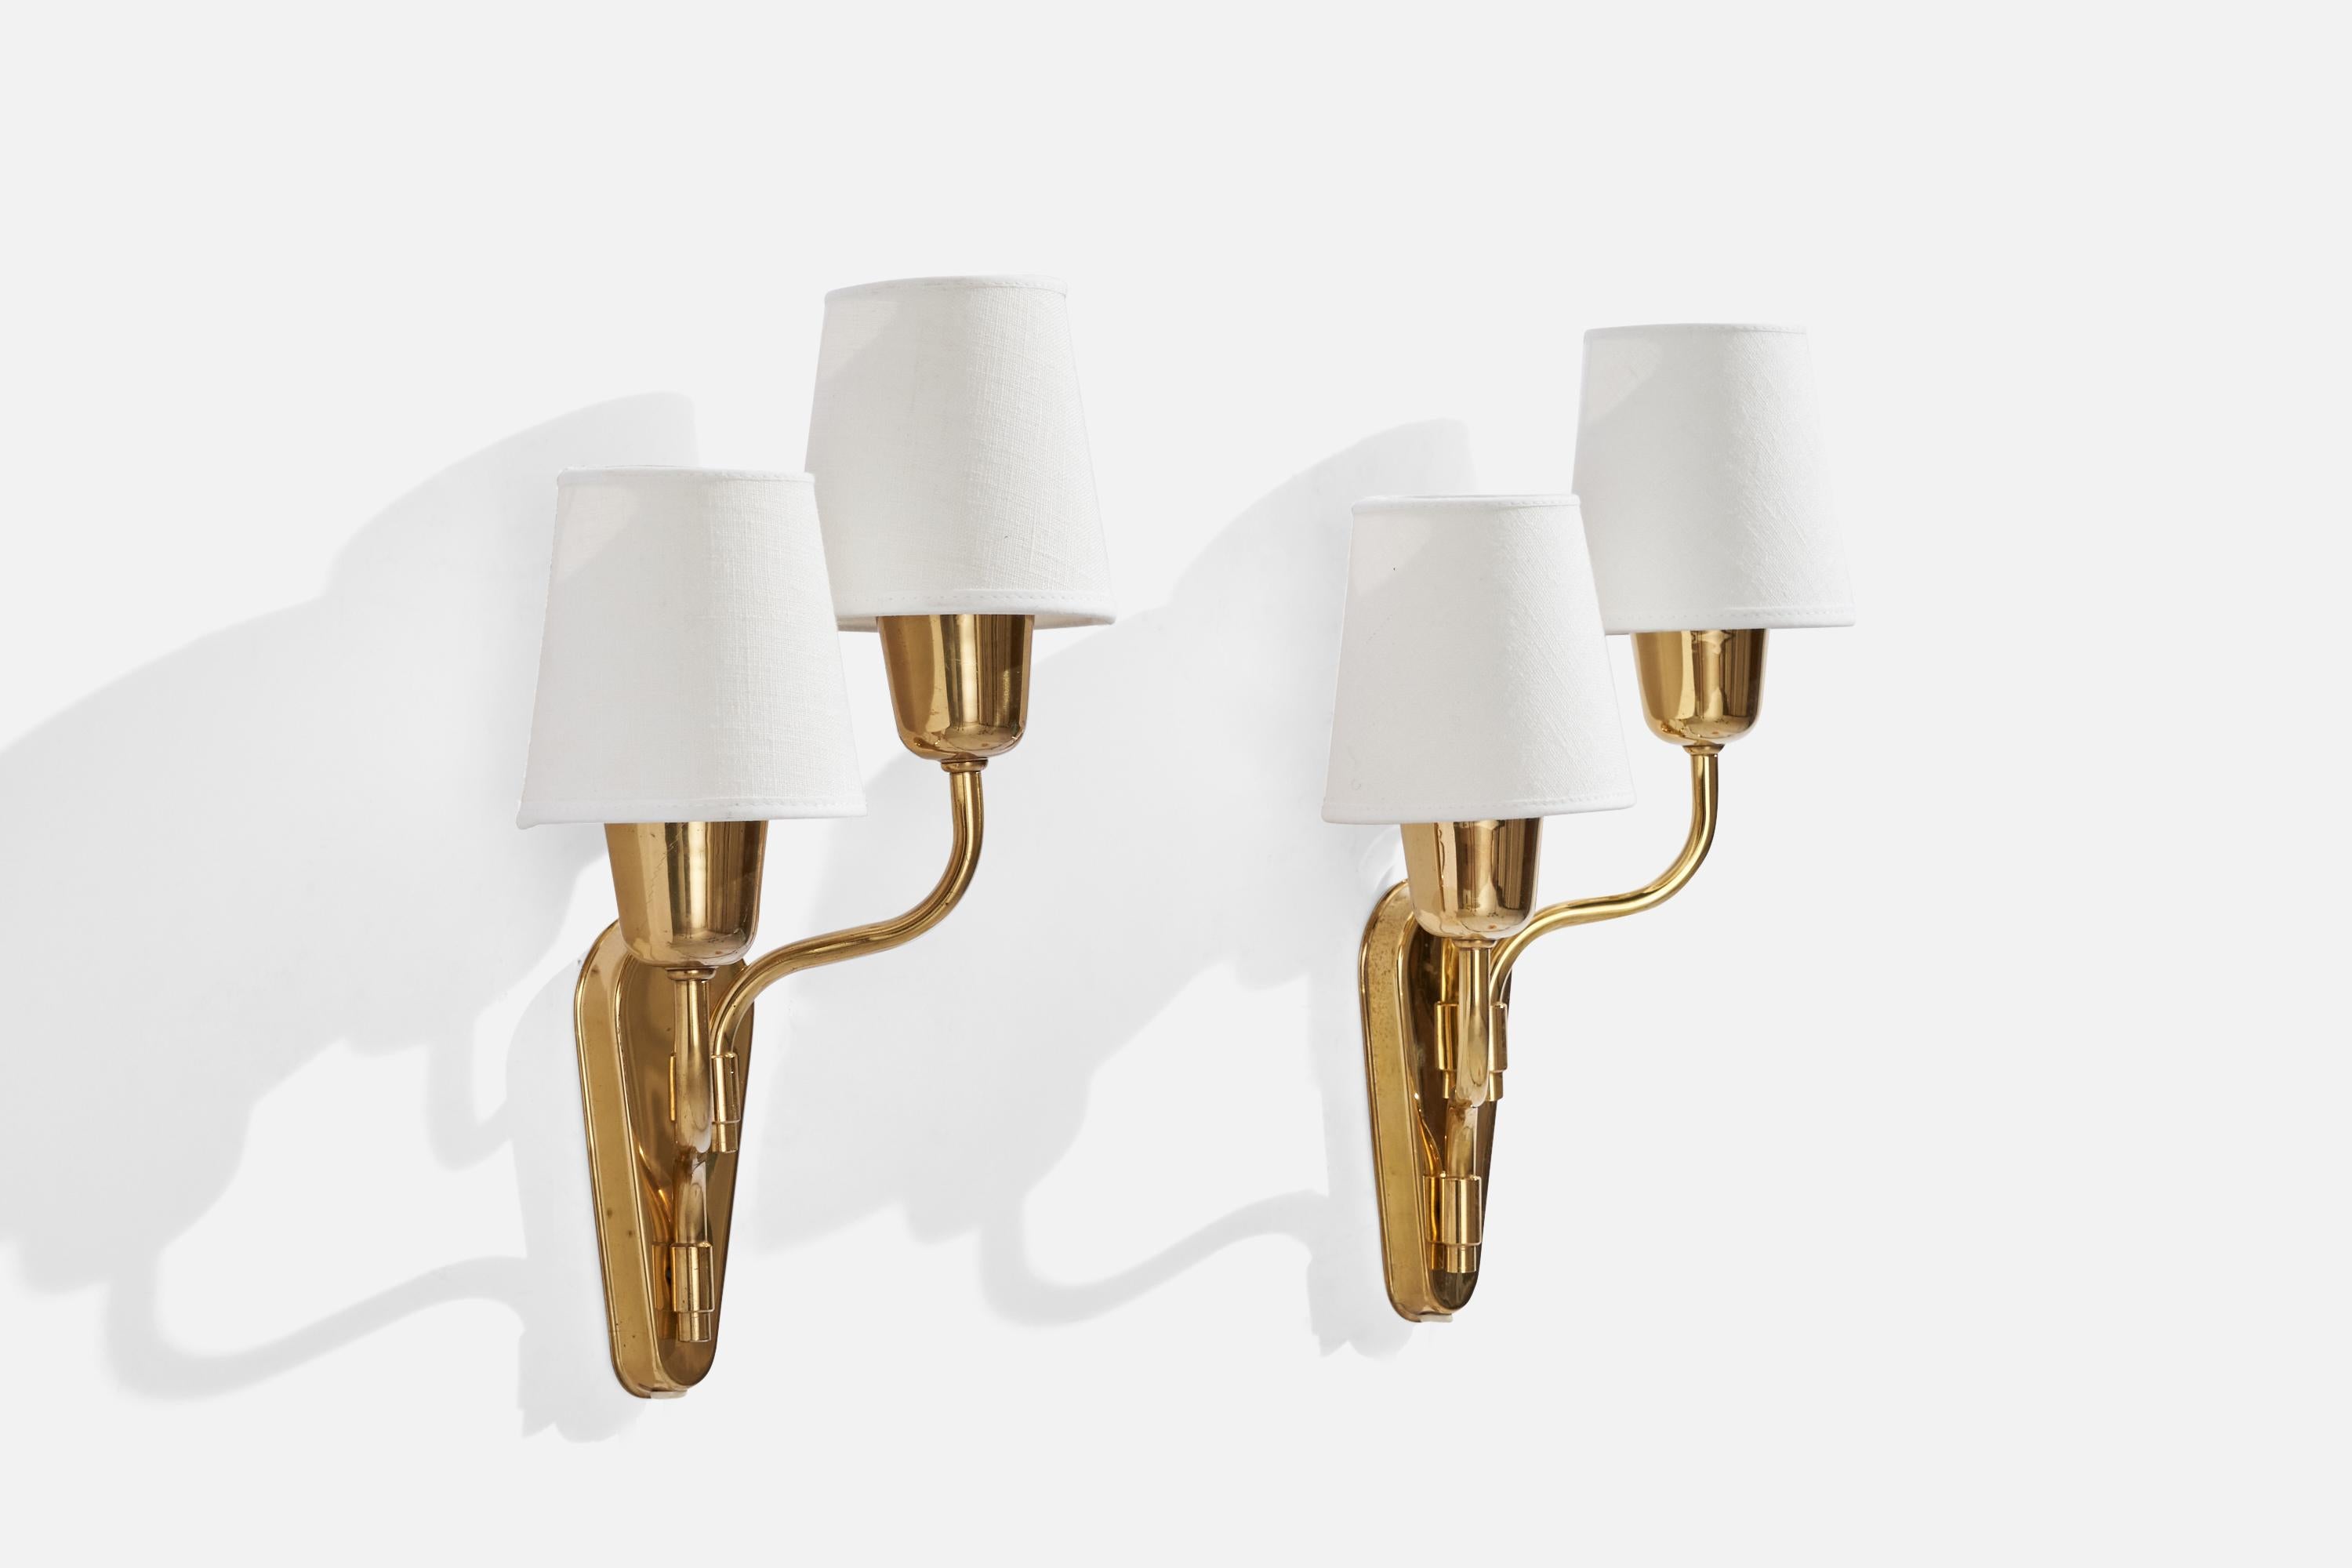  A pair of brass and white fabric wall lights, designed and produced by Fog & Mørup, Denmark, c. 1940s.

Overall Dimensions (inches): 13.5” H x 9” W x 5” D
Back Plate Dimensions (inches): 5.9” H x 2.45” W x 0.70” D
Bulb Specifications: E-26